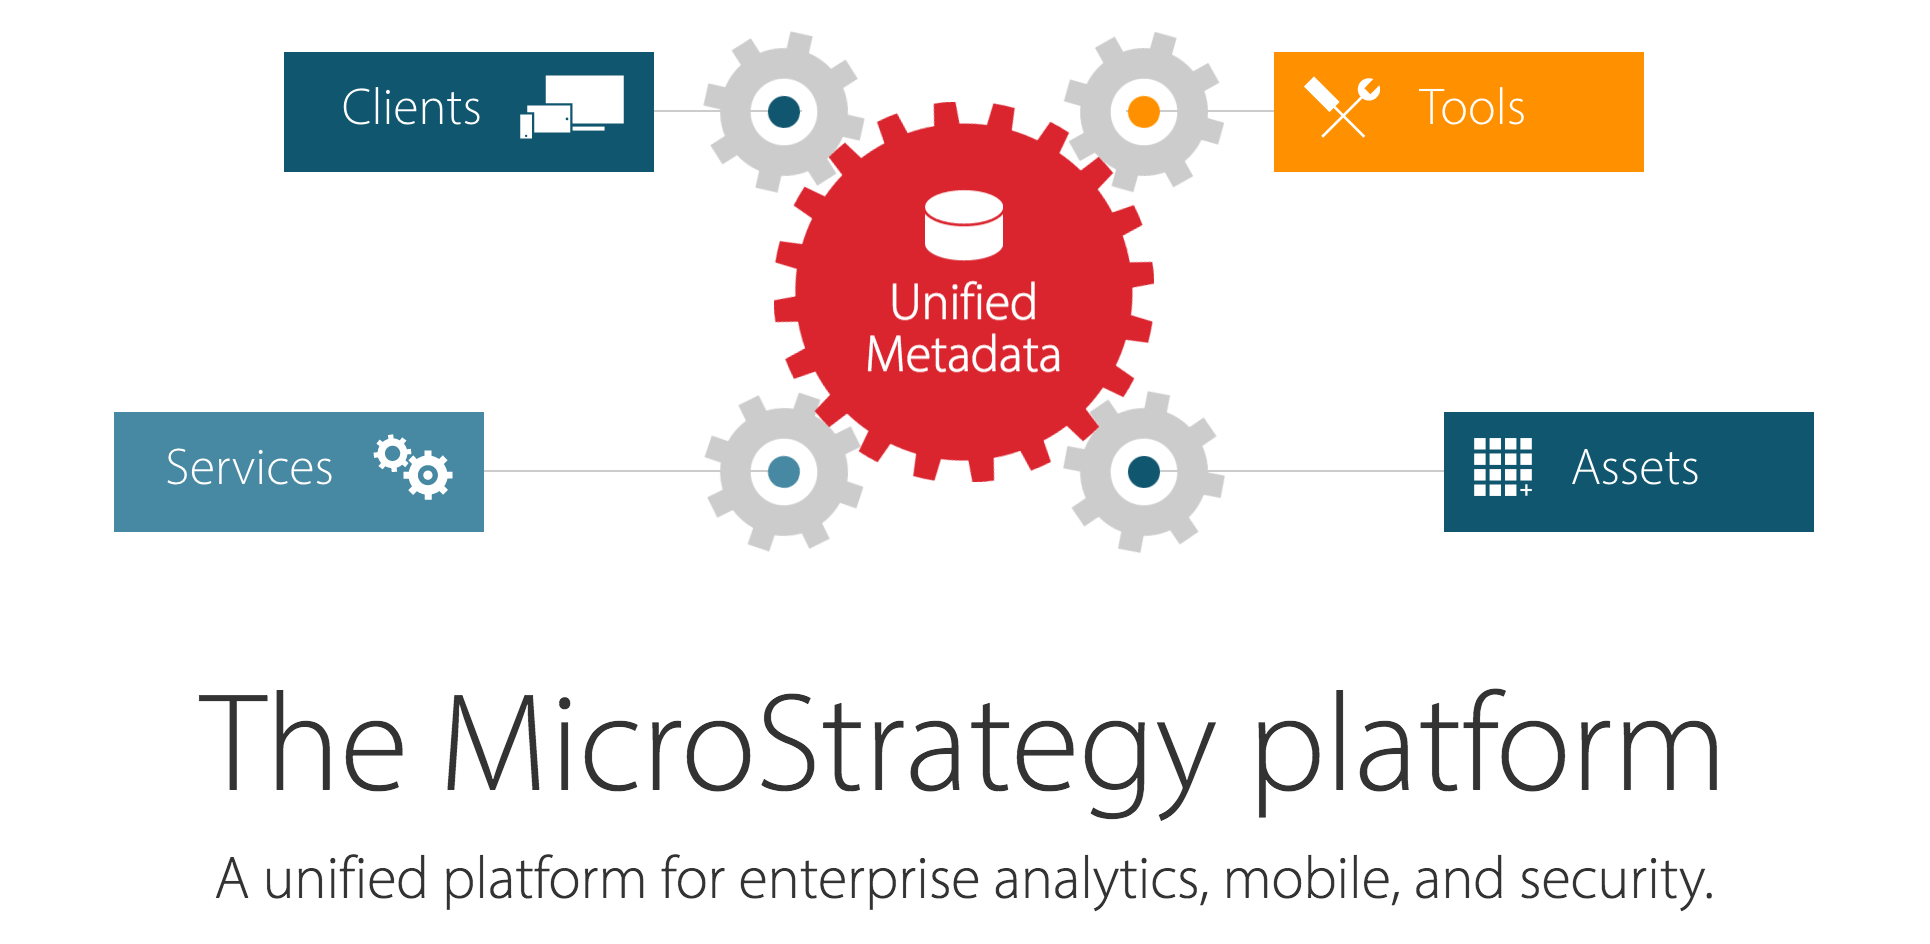 Why go for Microstrategy